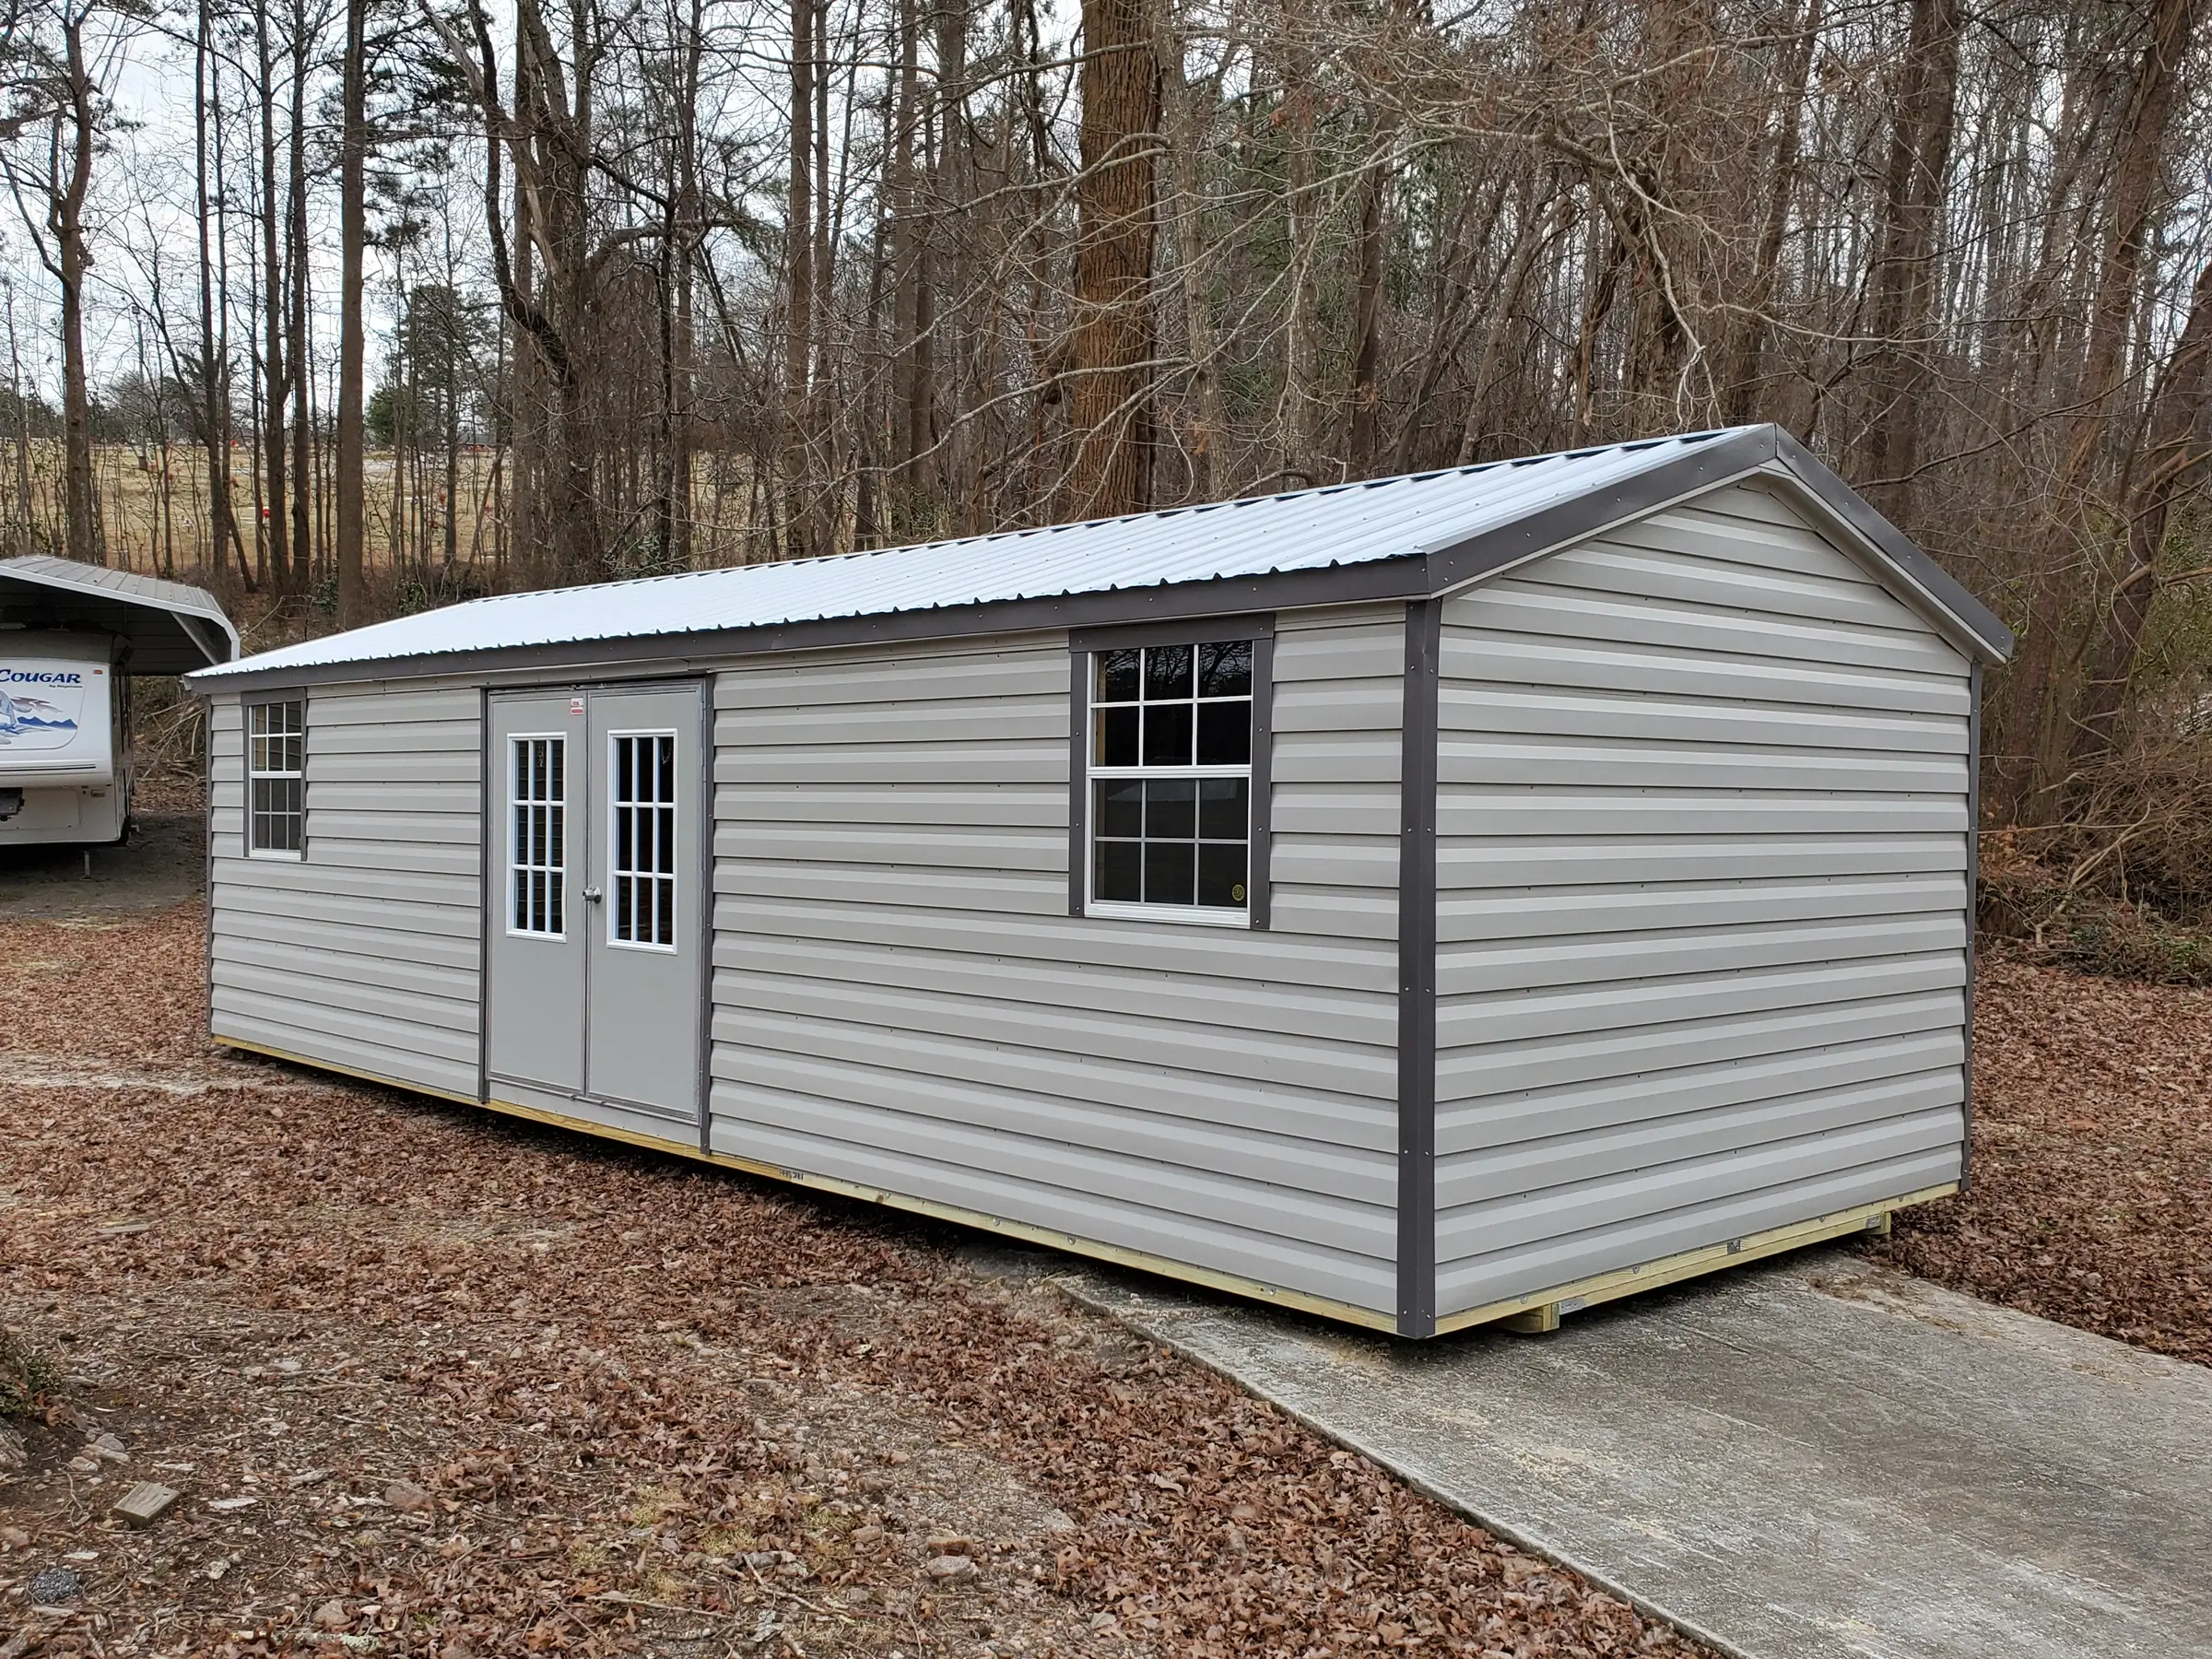 Classic style 12 by 30 portable shed building with multiple windows and doors.